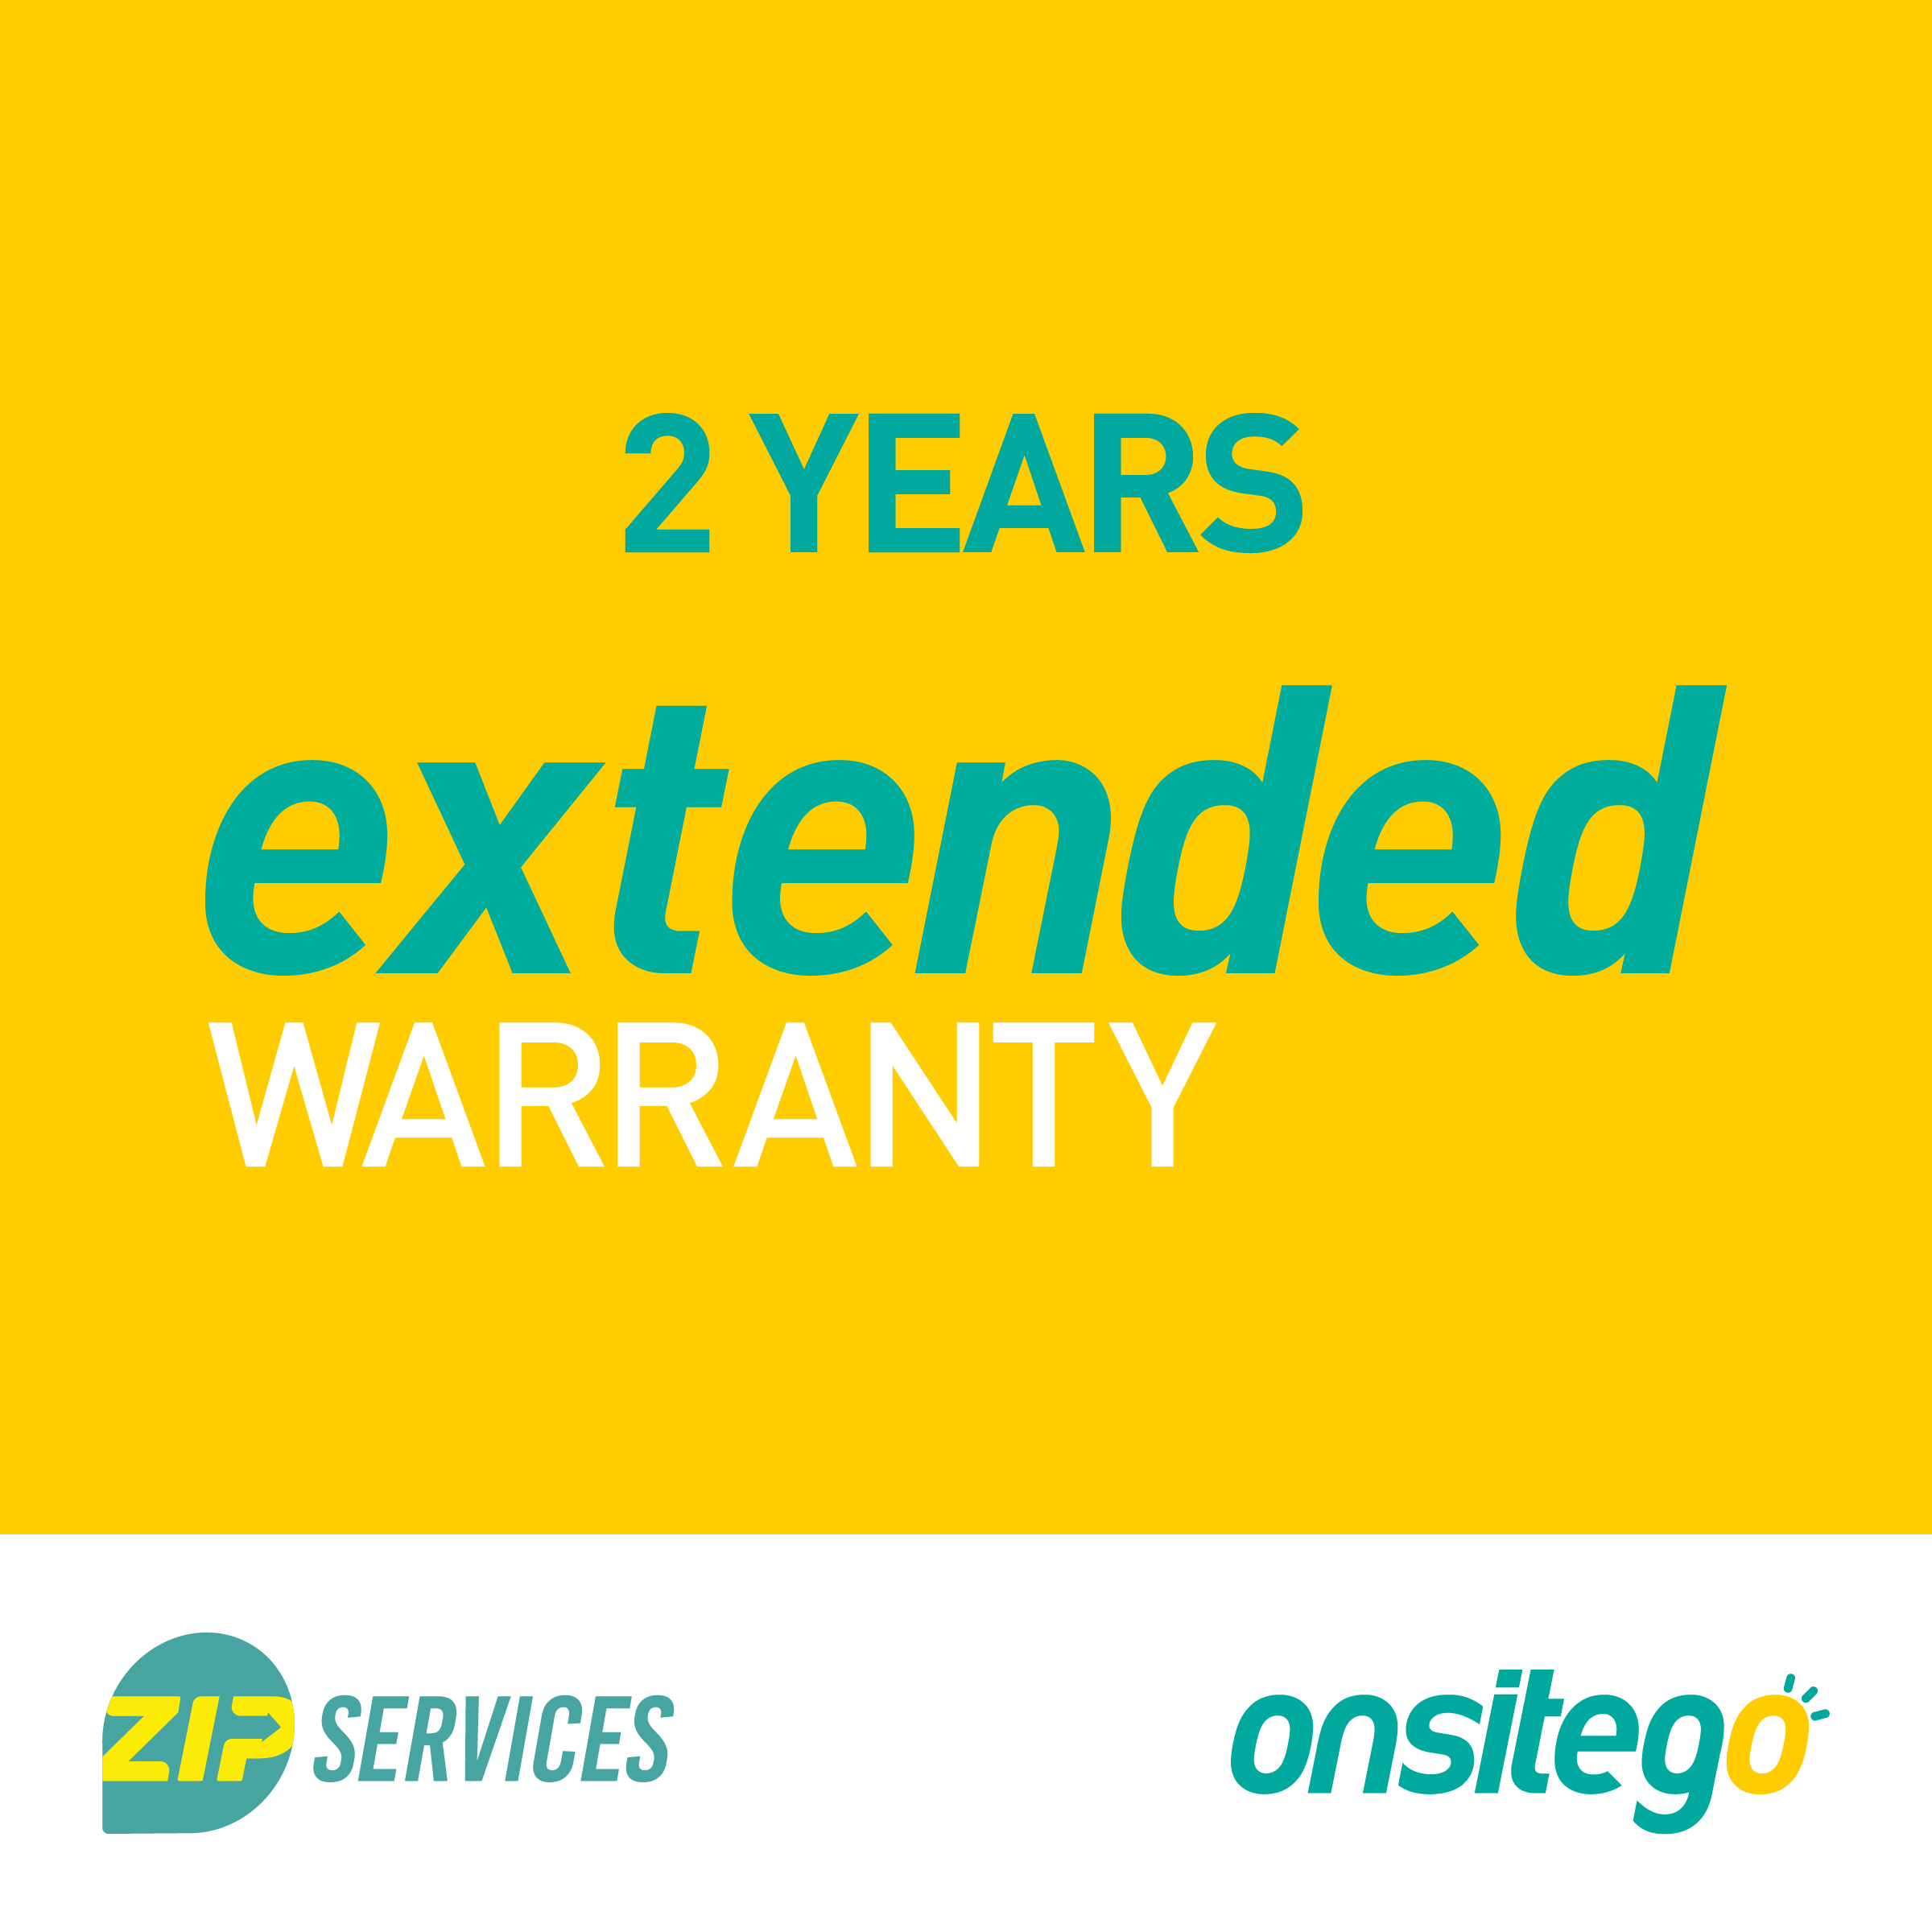 OnsiteGo 2 Year Extended Warranty for Chimney Rs.0 - Rs.10000_1